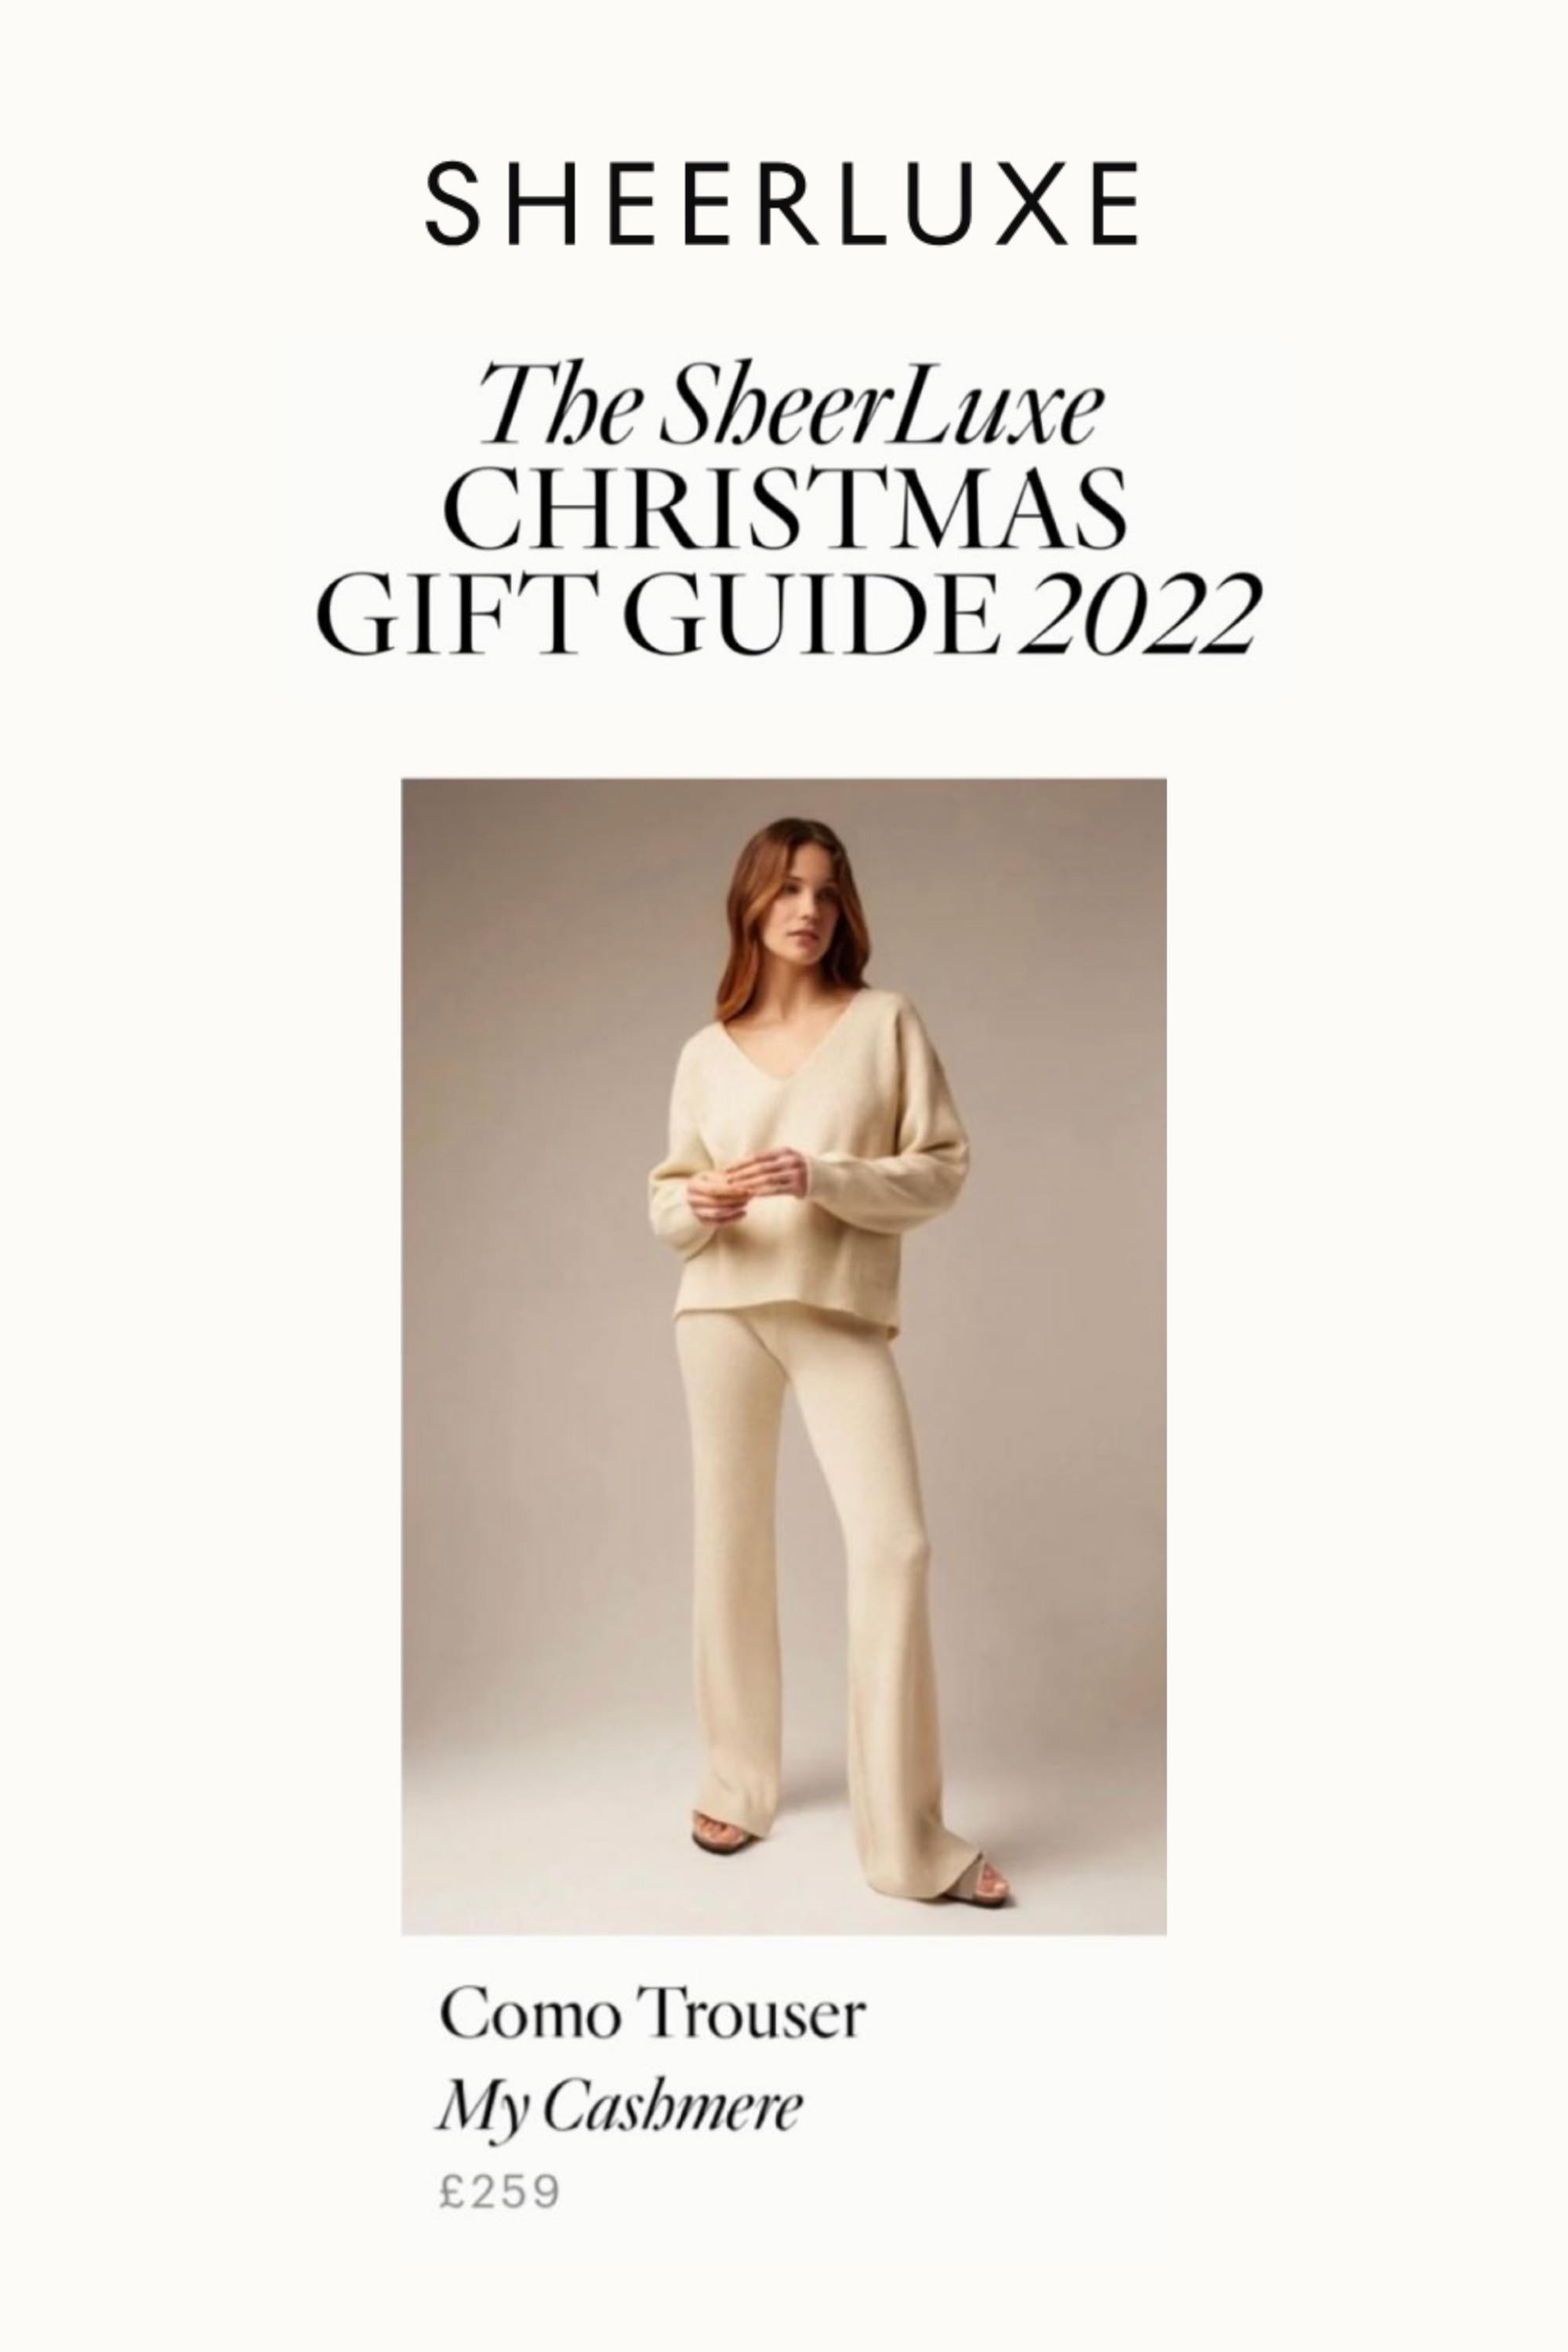 SHEERLUXE | The Christmas Gift Guide 2022